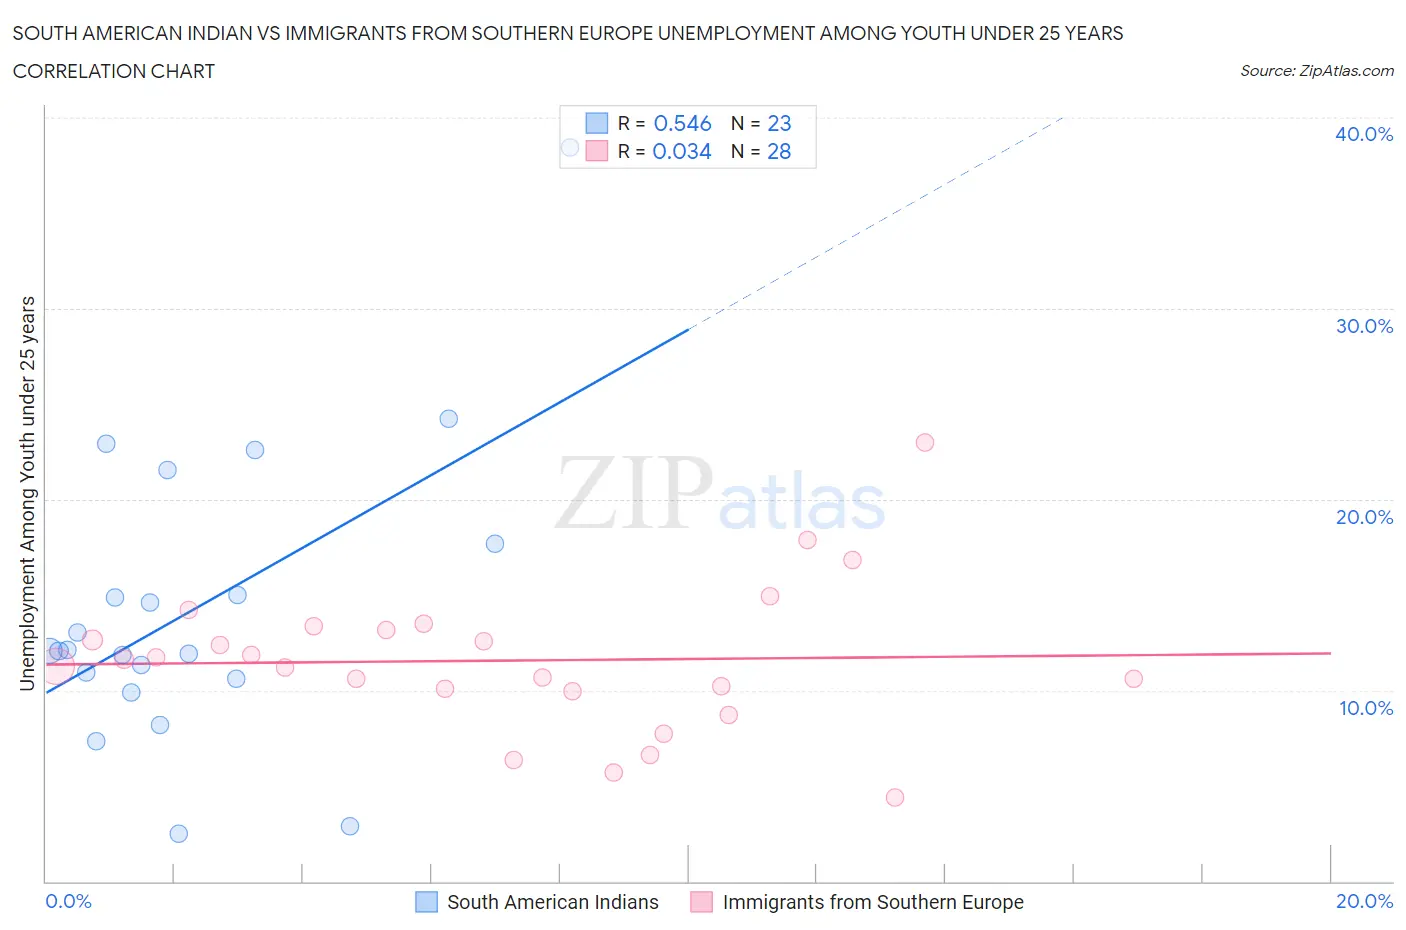 South American Indian vs Immigrants from Southern Europe Unemployment Among Youth under 25 years